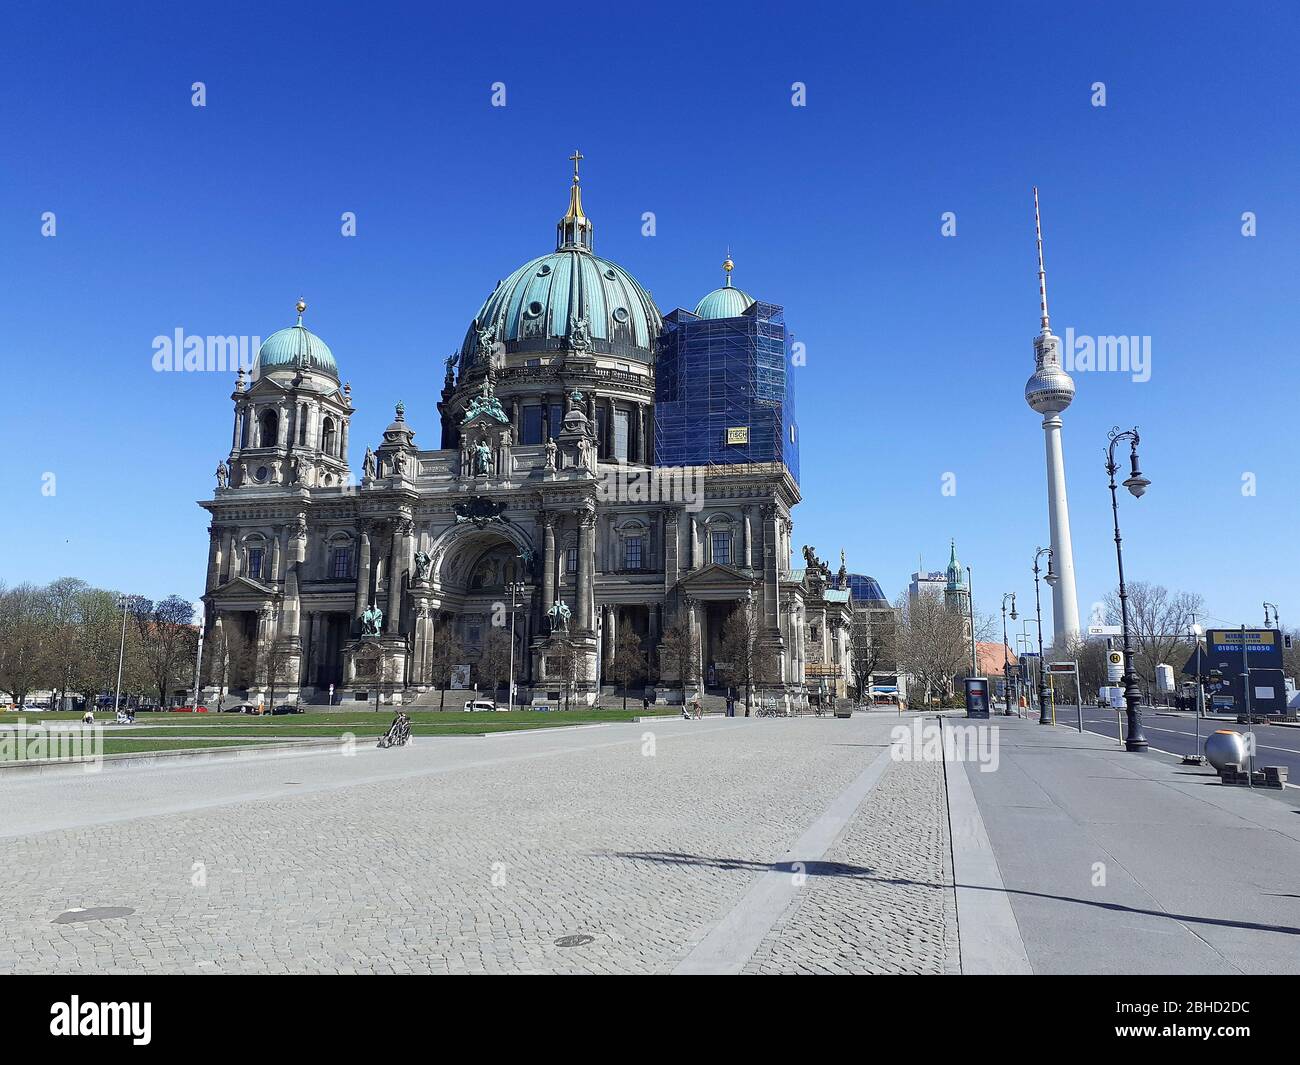 Berliner Dom and Lustgarten, devoid of tourists during the lock-down due to the Coronavirus pandemic, April 2020, Berlin, Germany Stock Photo